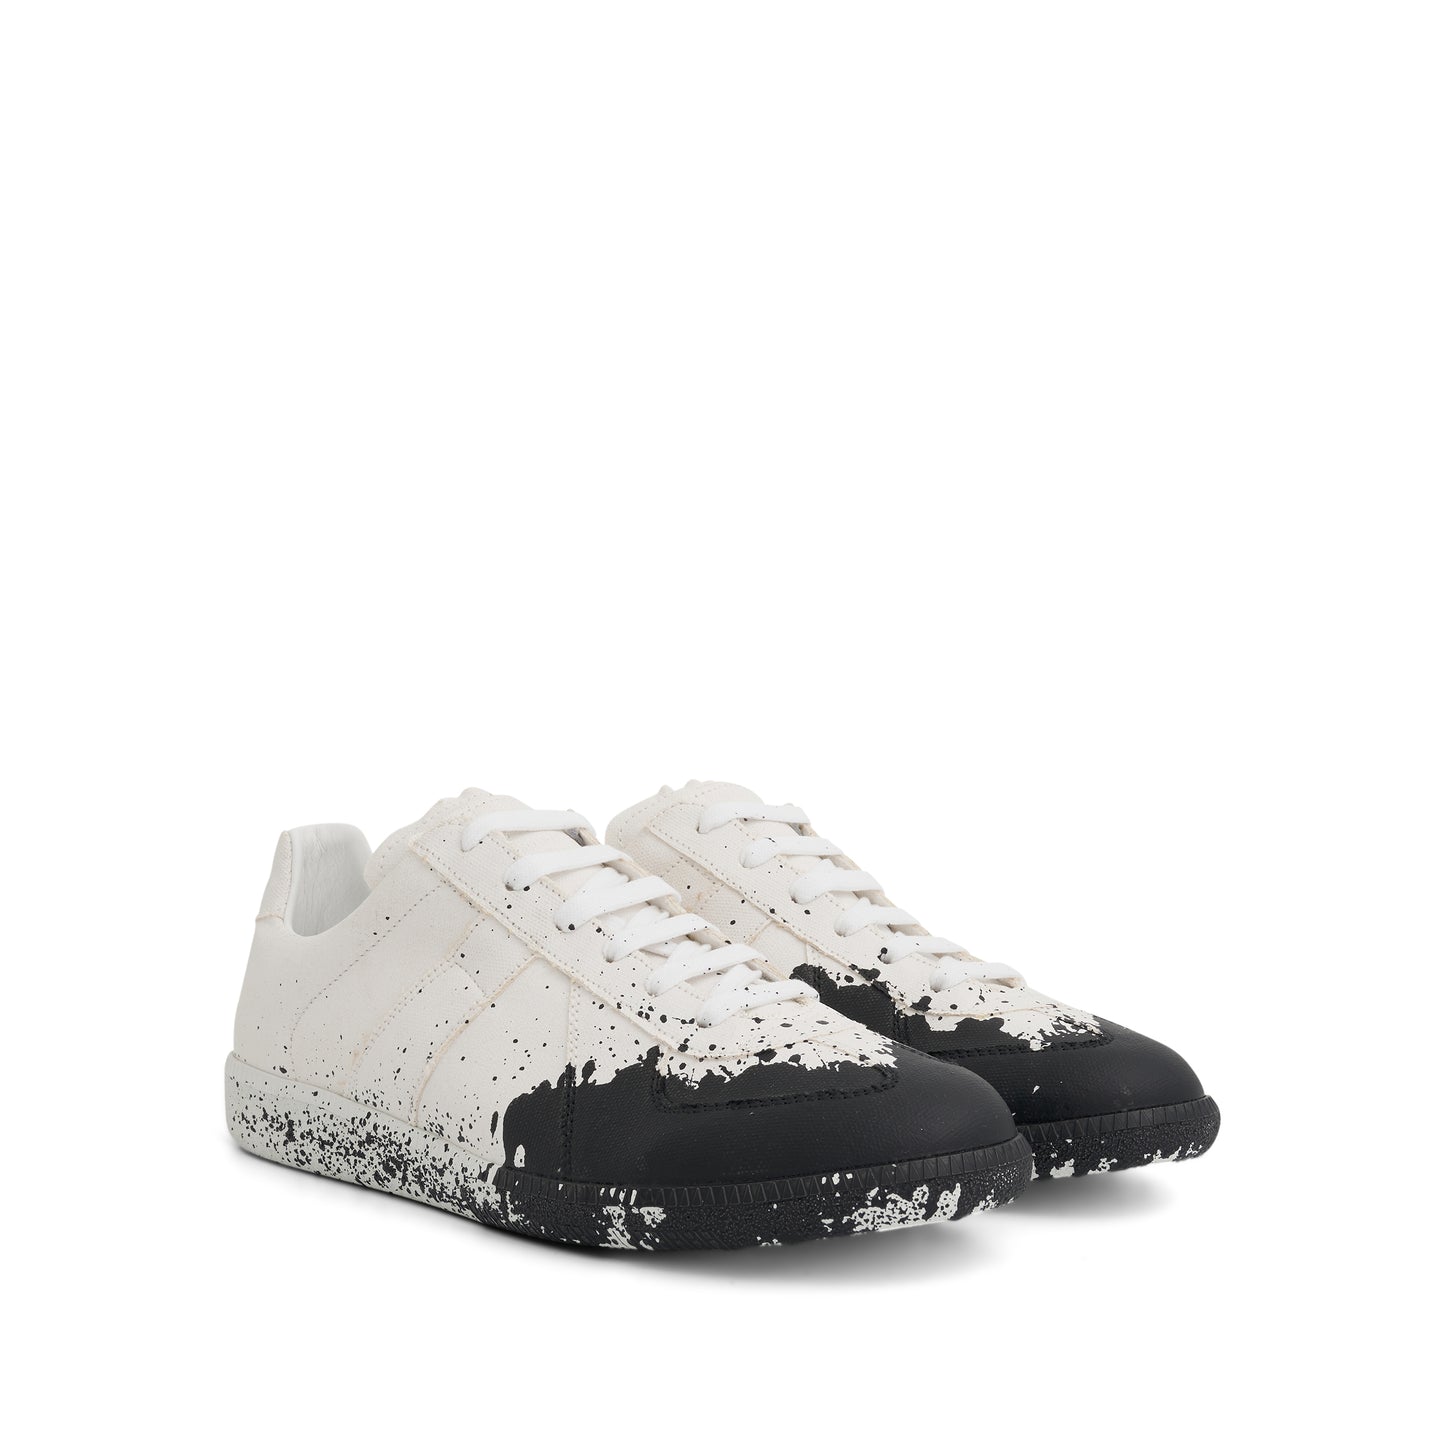 Replica Painted Canvas Sneakers in White/Black